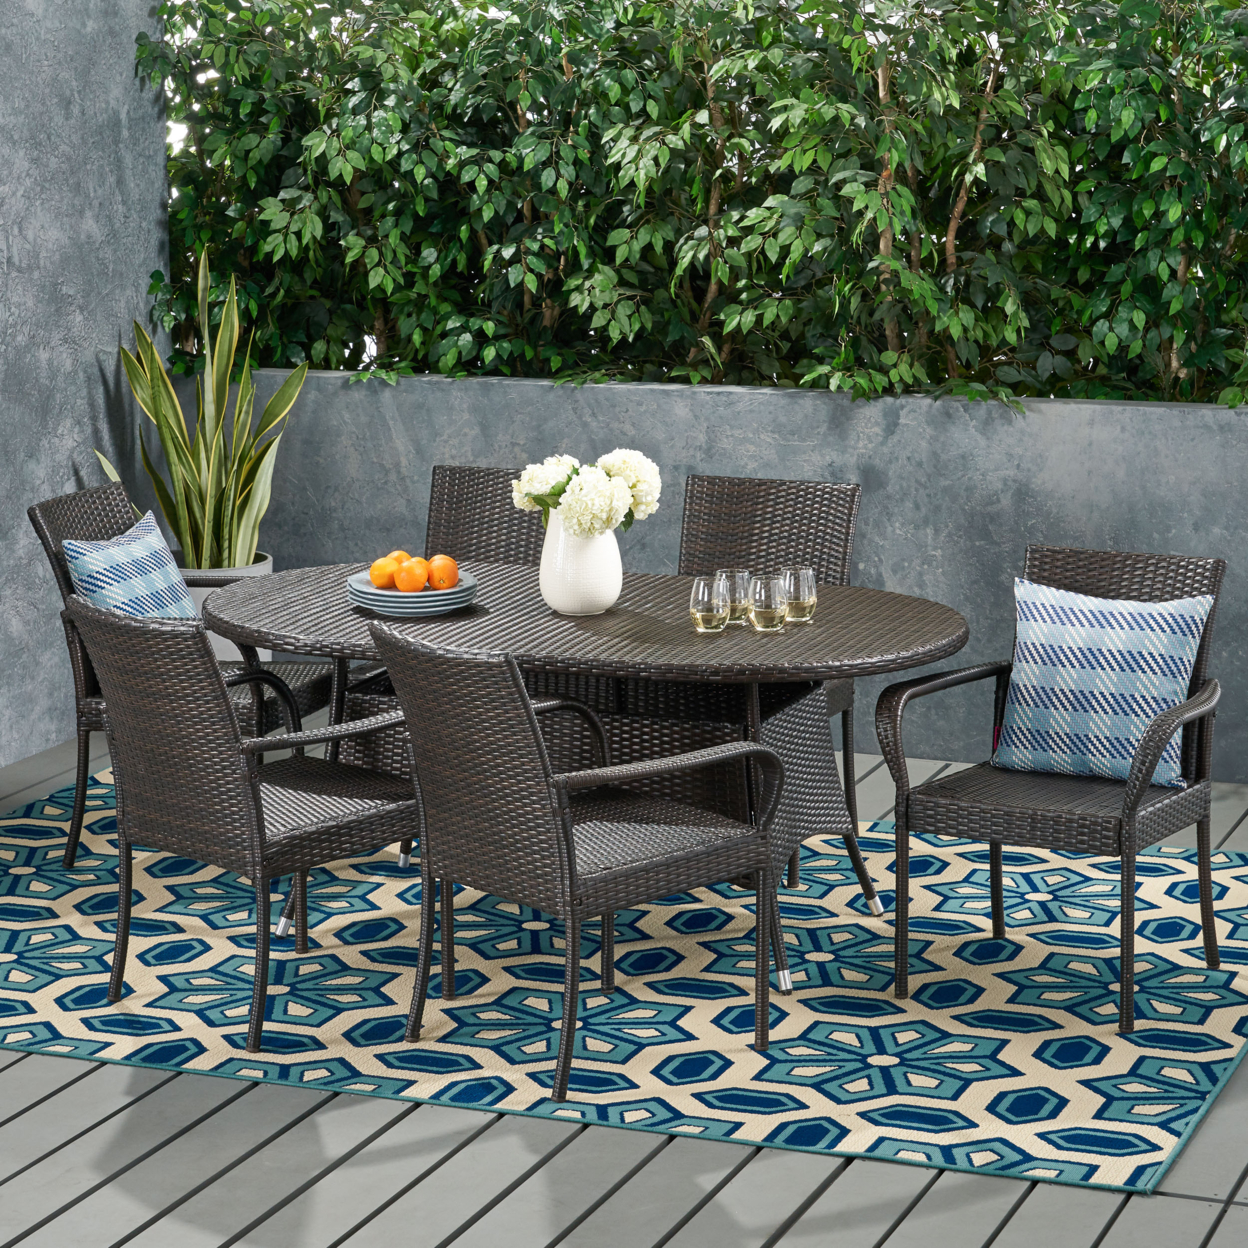 Eclipse Outdoor Contemporary 6 Seater Wicker Dining Set - Multi-brown